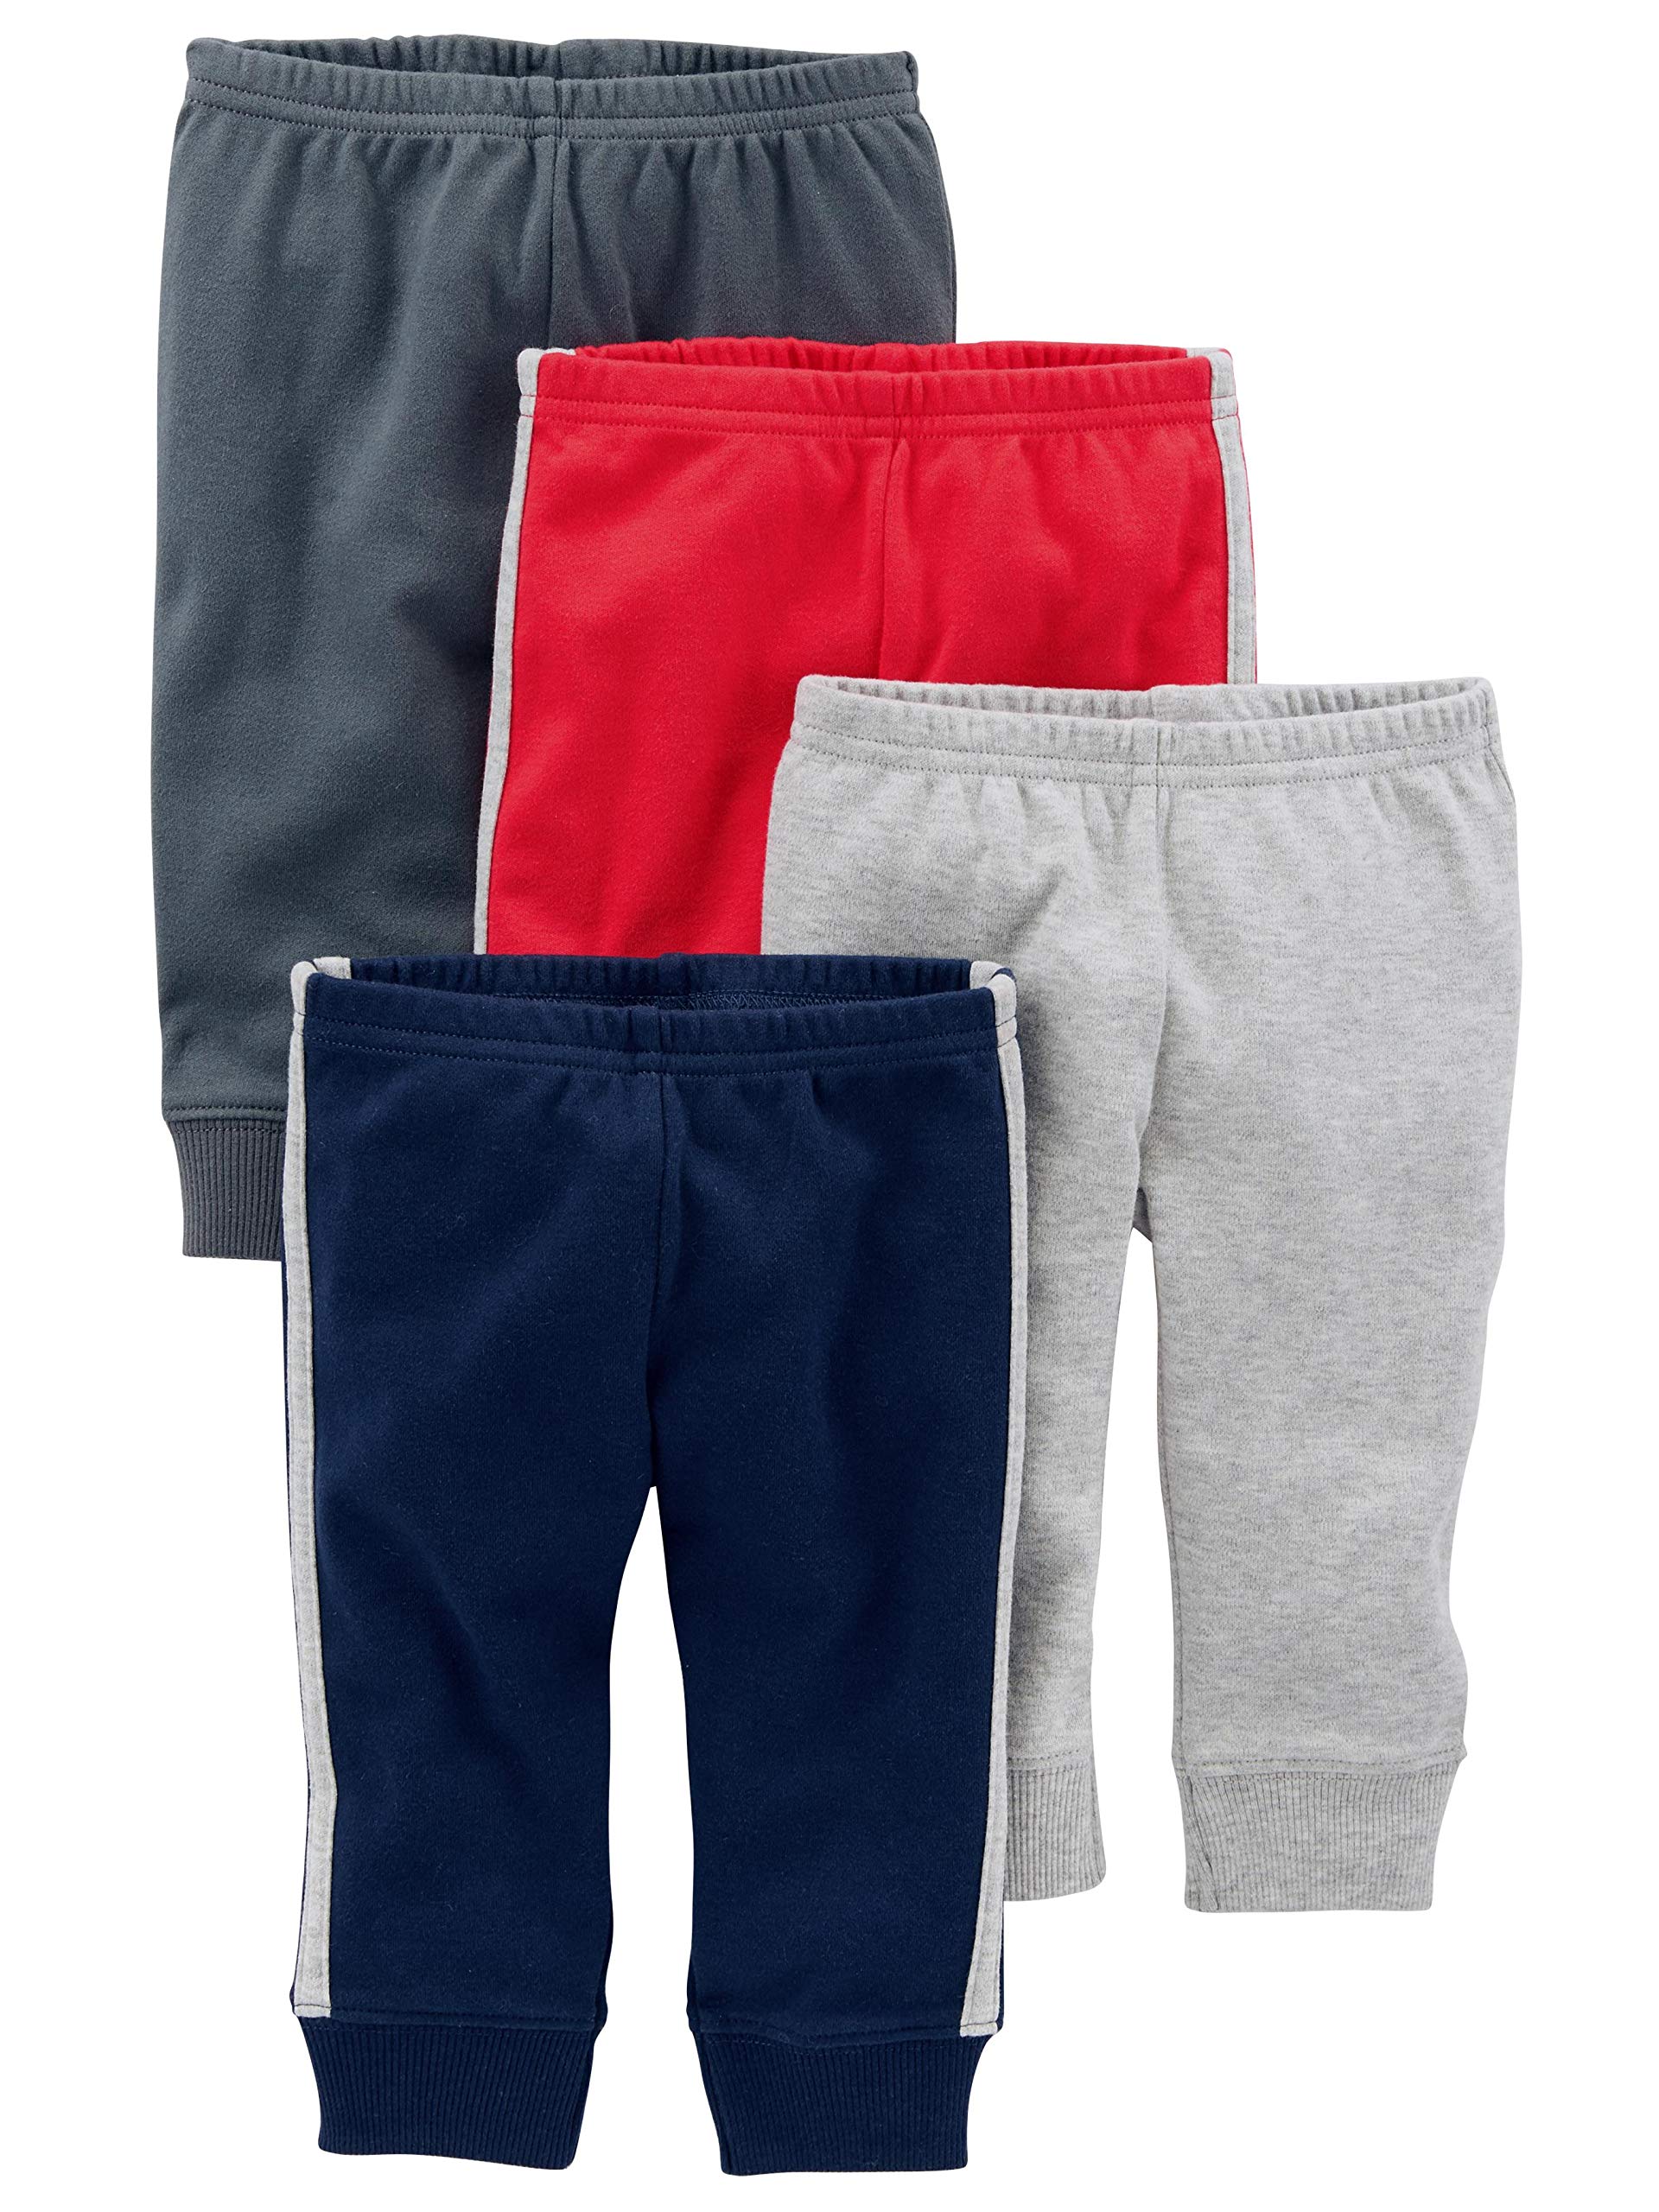 Simple Joys by Carter's Baby Boys' Cotton Pants, Pack of 4